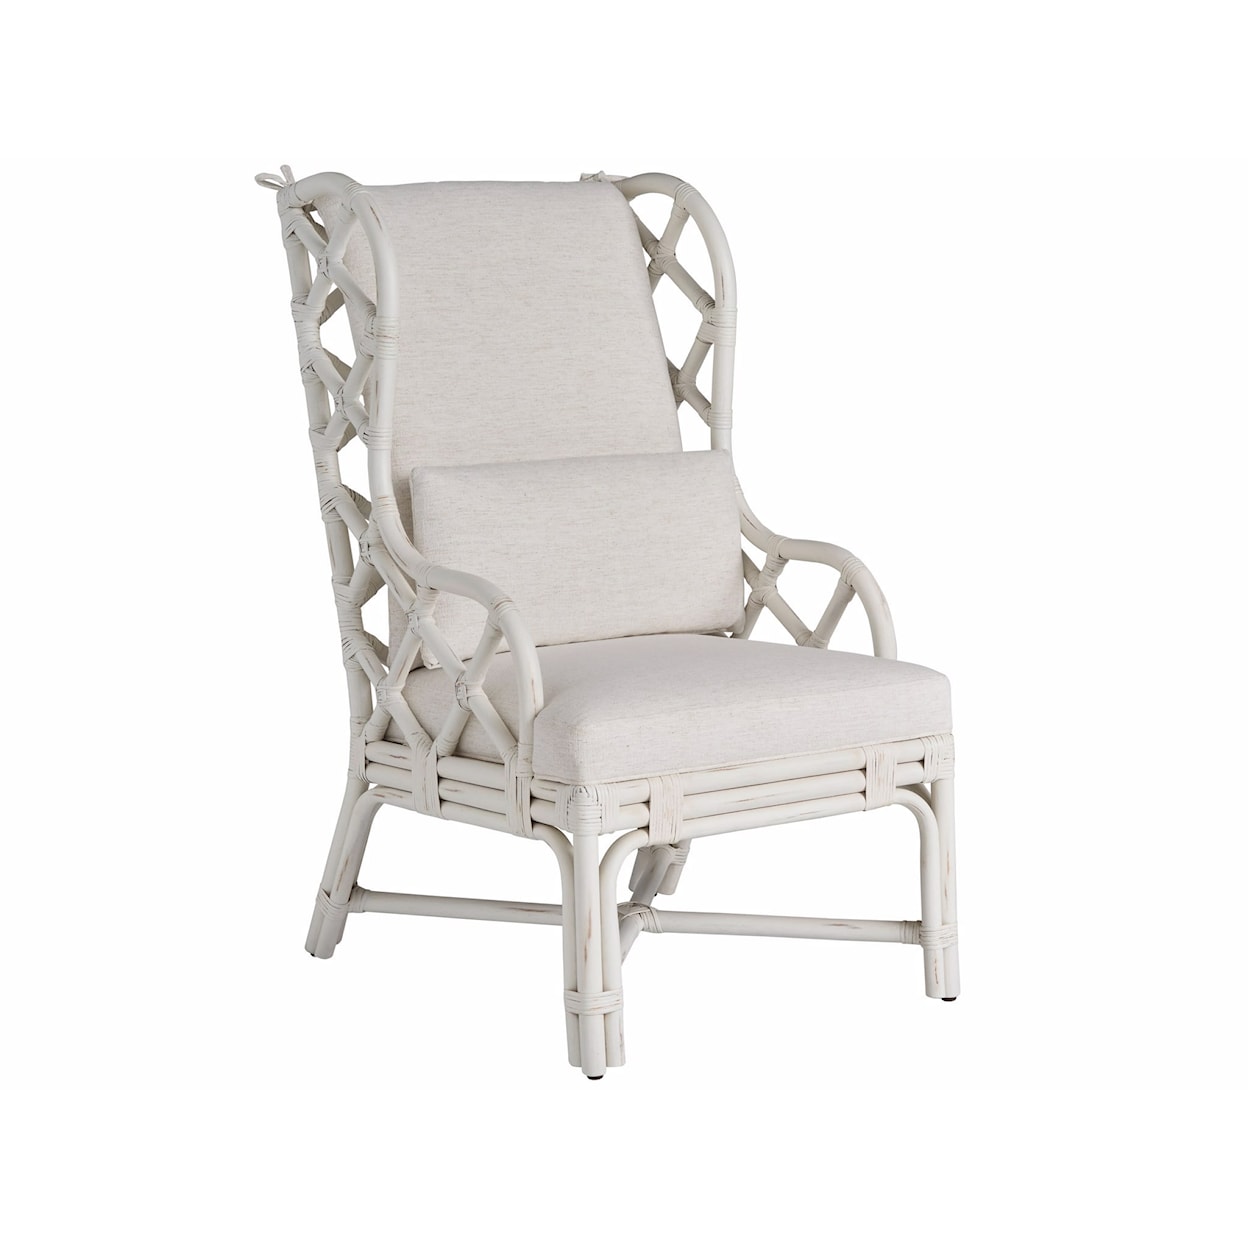 Universal Weekender Coastal Living Home Collection Coastal Upholstered Arm Chair